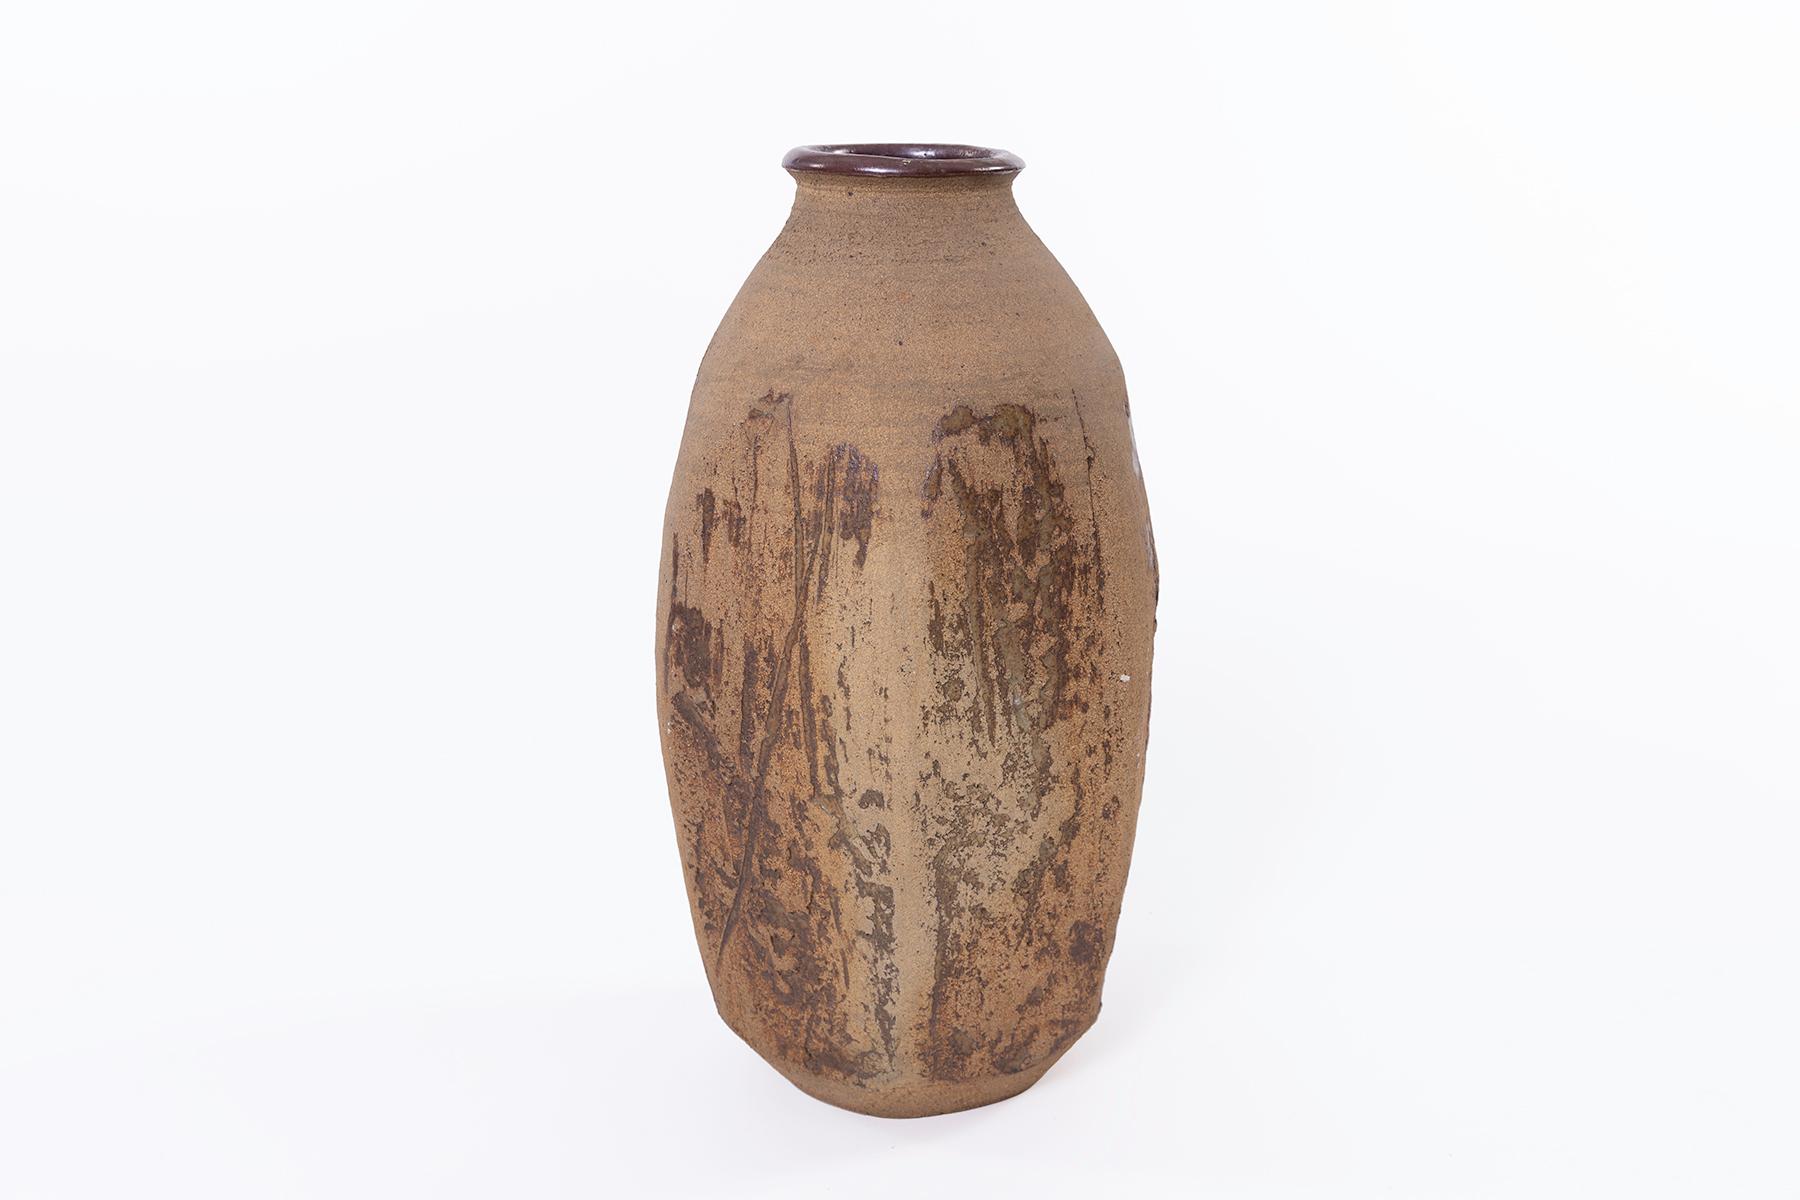 Large scale stout studio ceramic vessel by Larry Shep. Shep studied under Peter Voulkos in 1958 at Los Angeles County Art Institute. His works can be found in many museums and private collections.